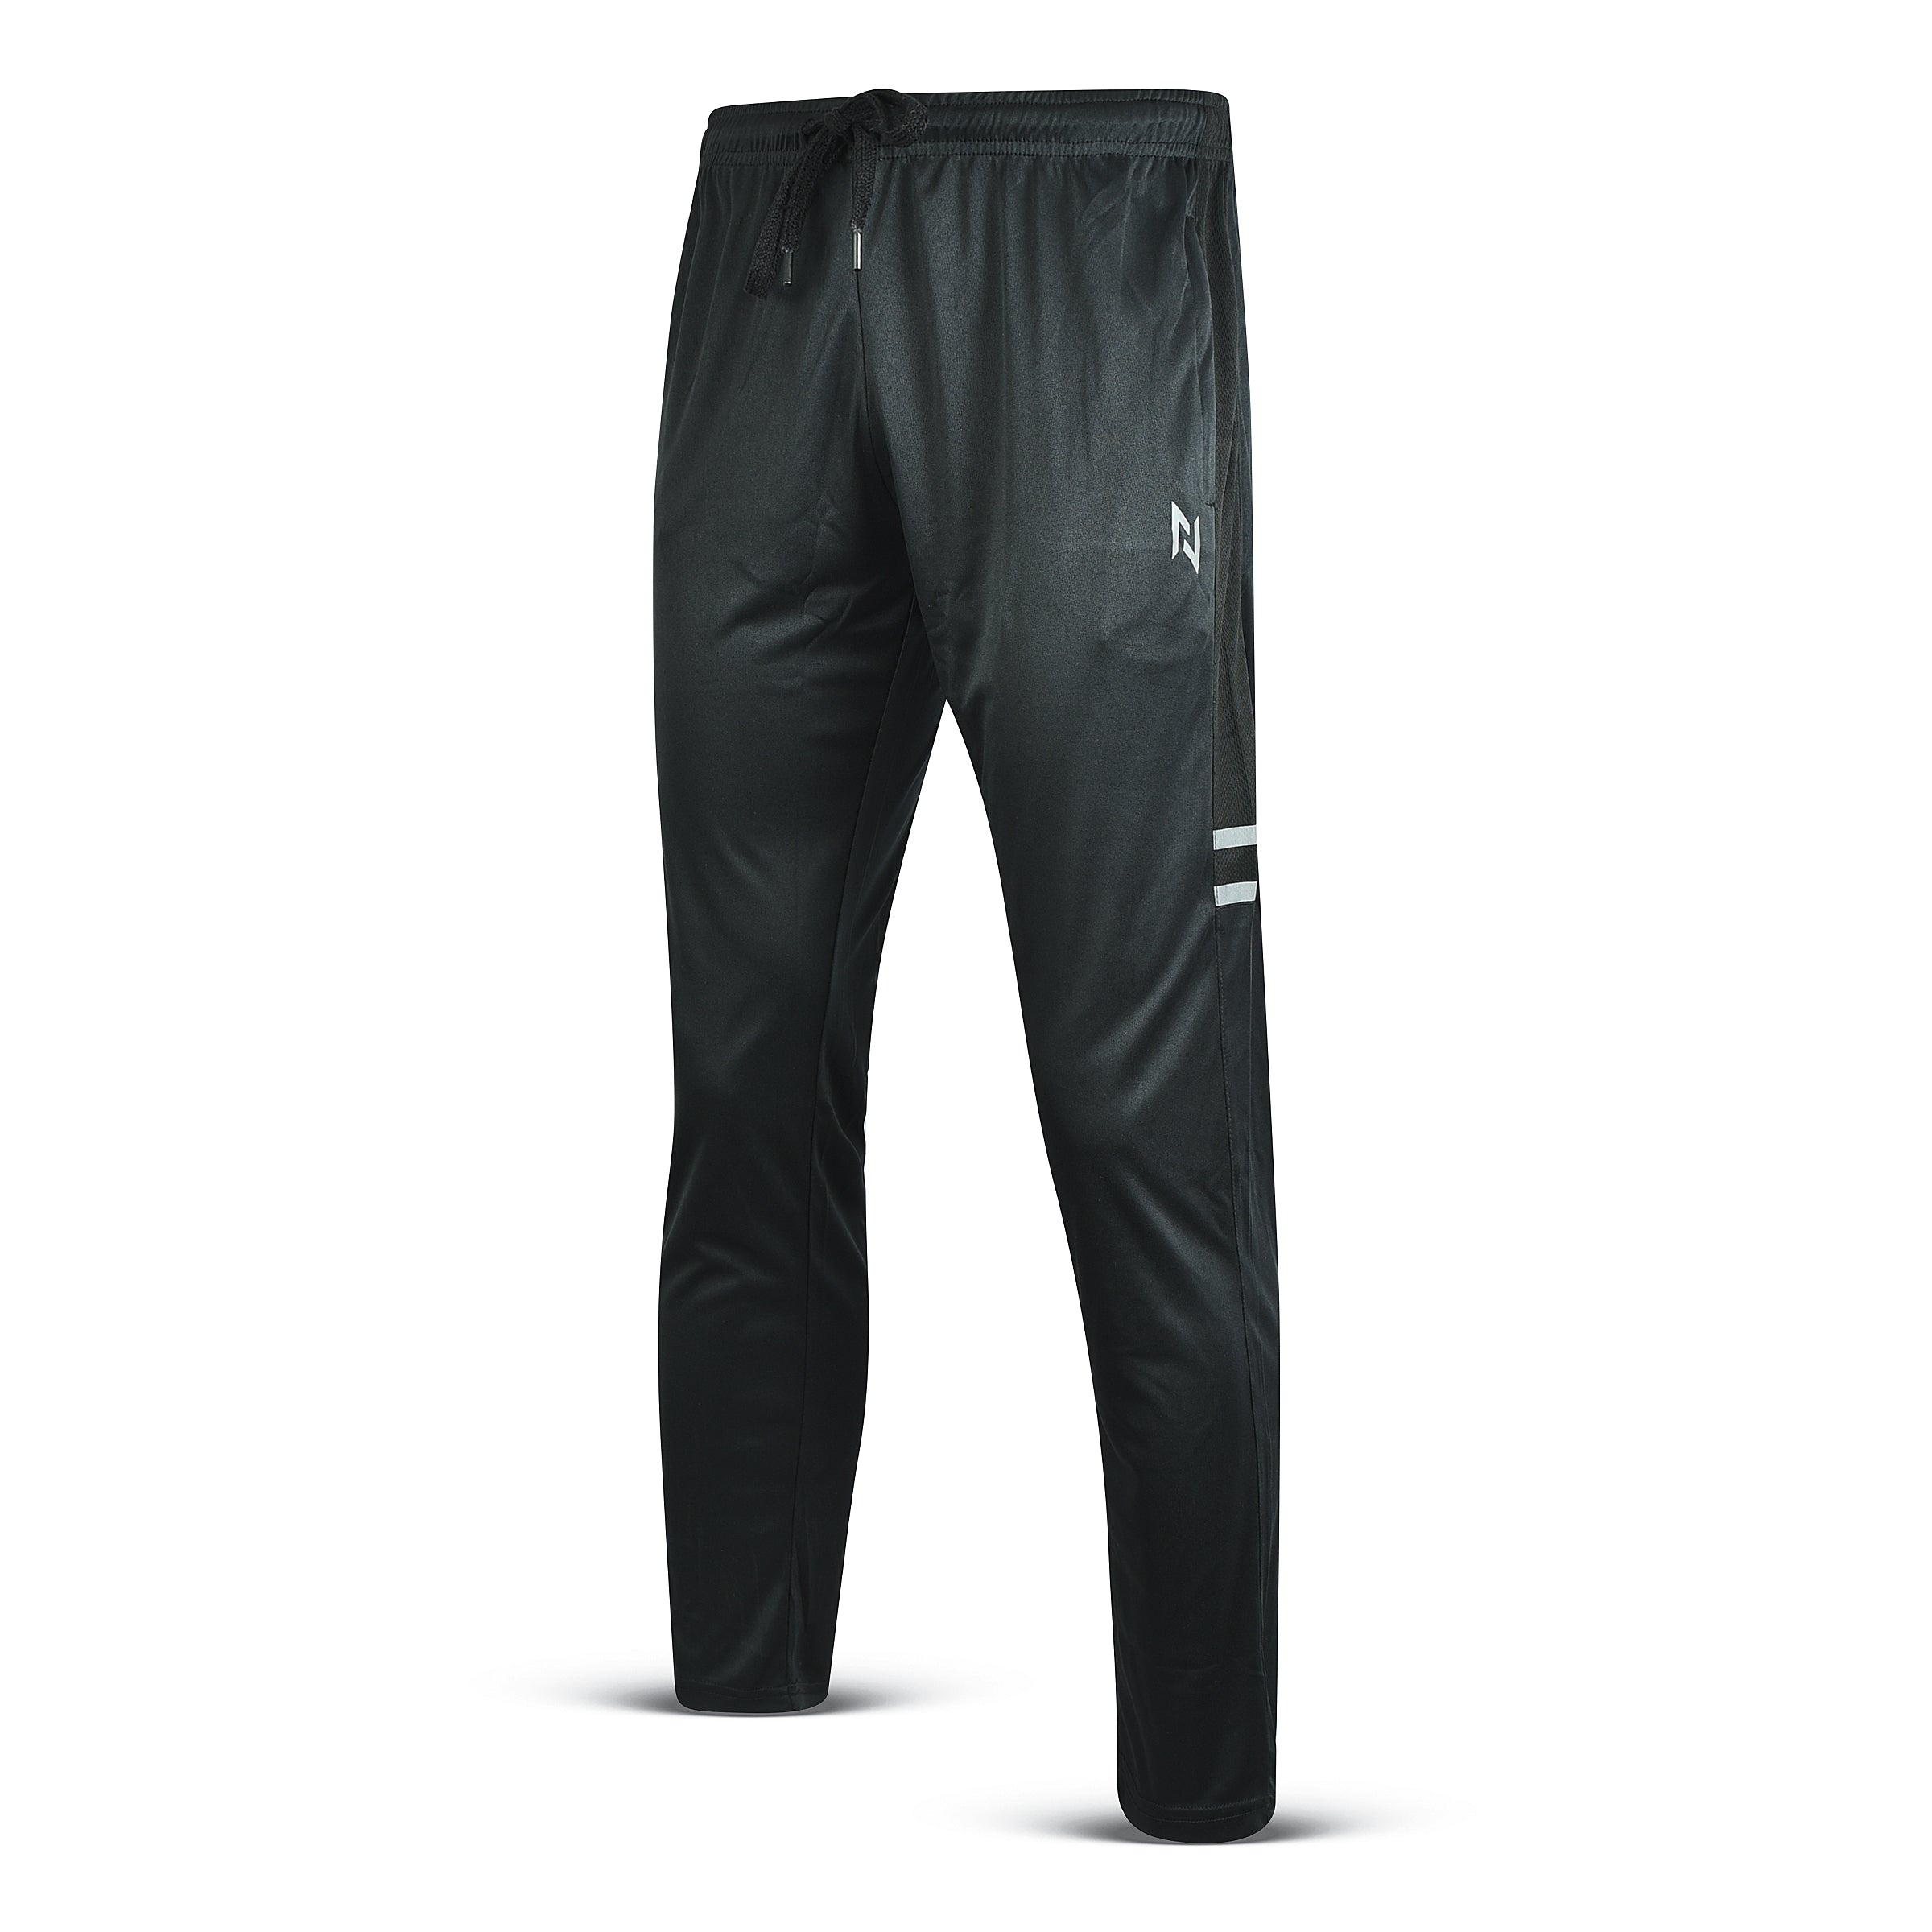 TRAINING TROUSERS 2.0